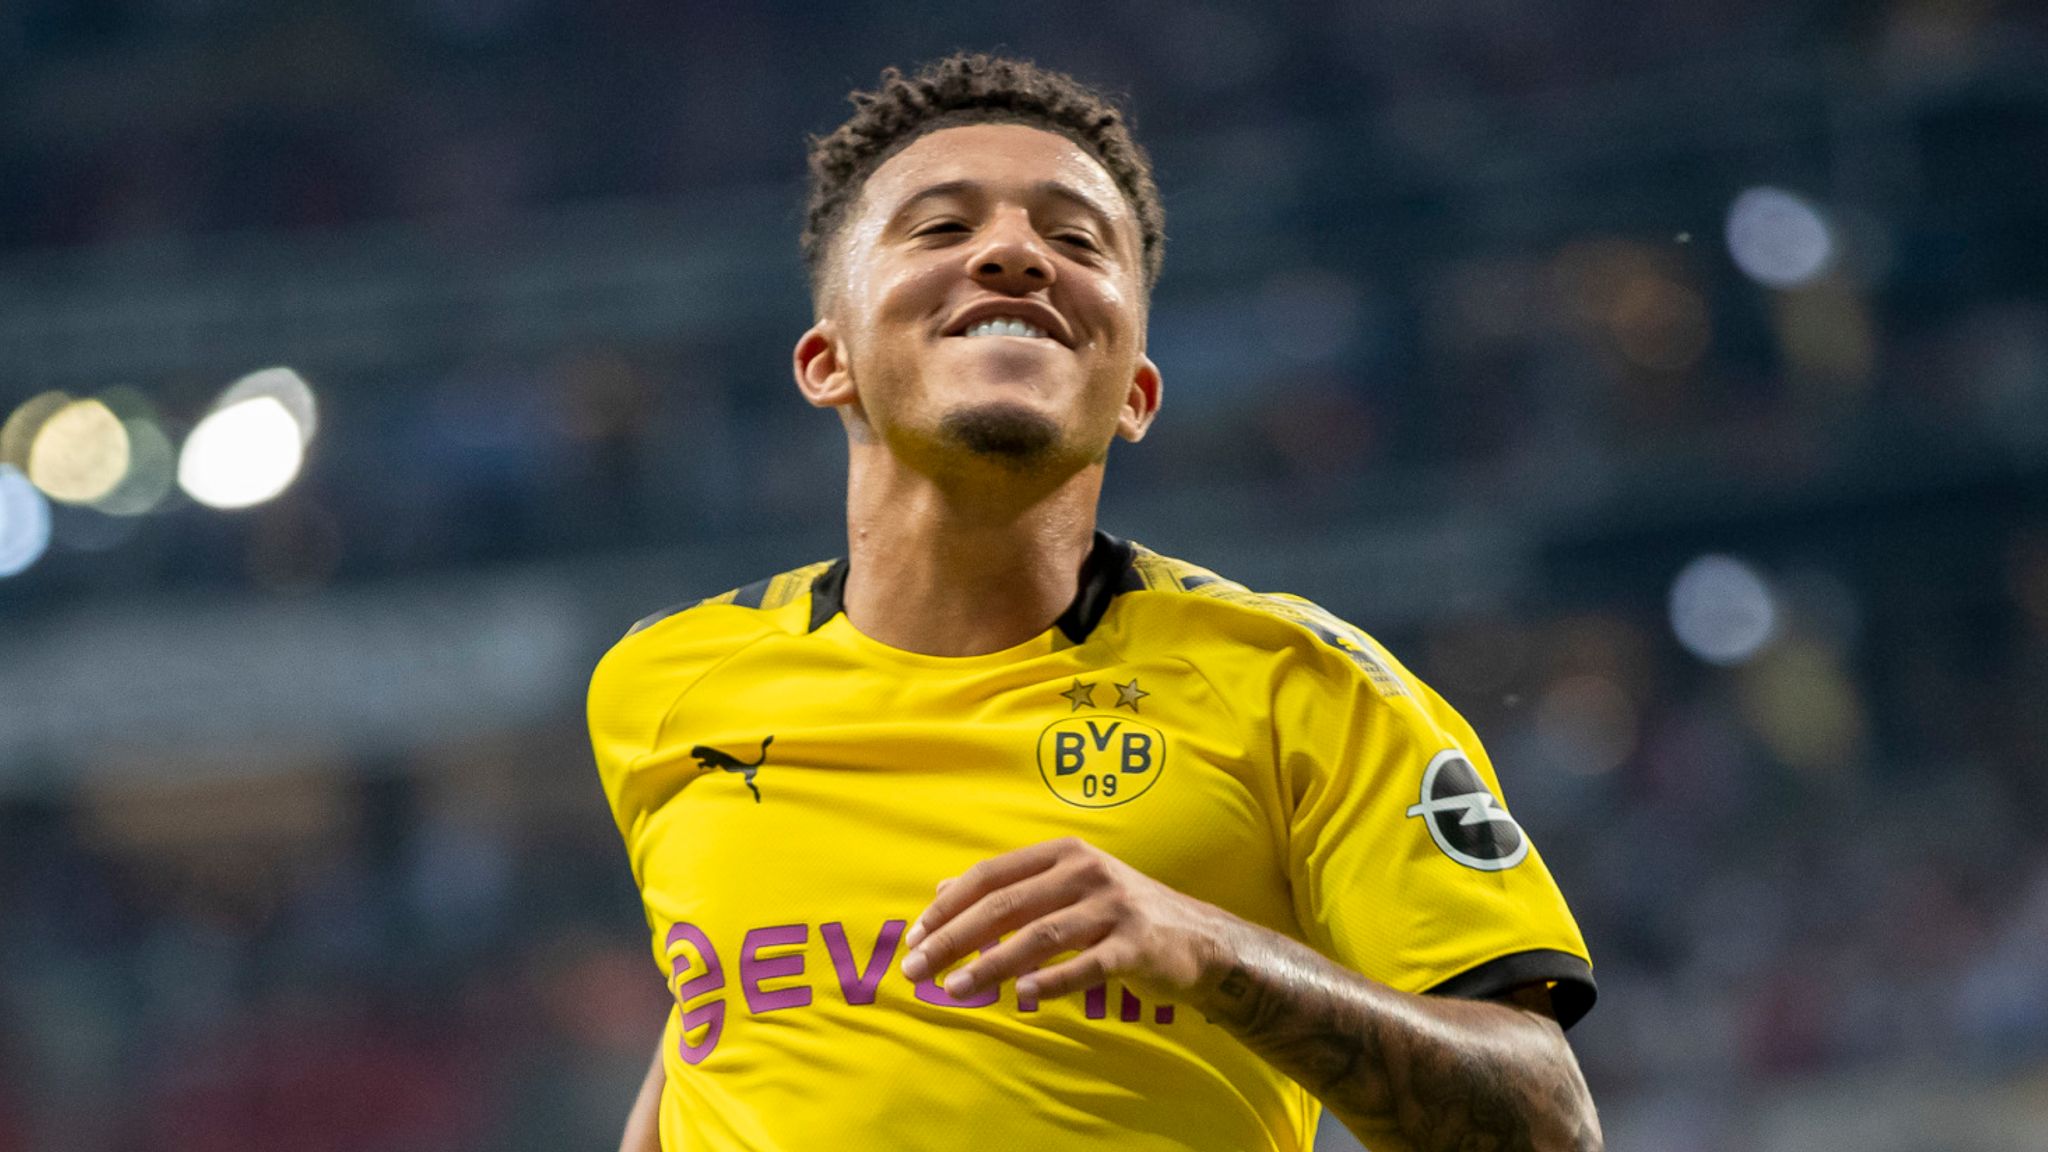 What Manchester United wanted to do to Sancho's career